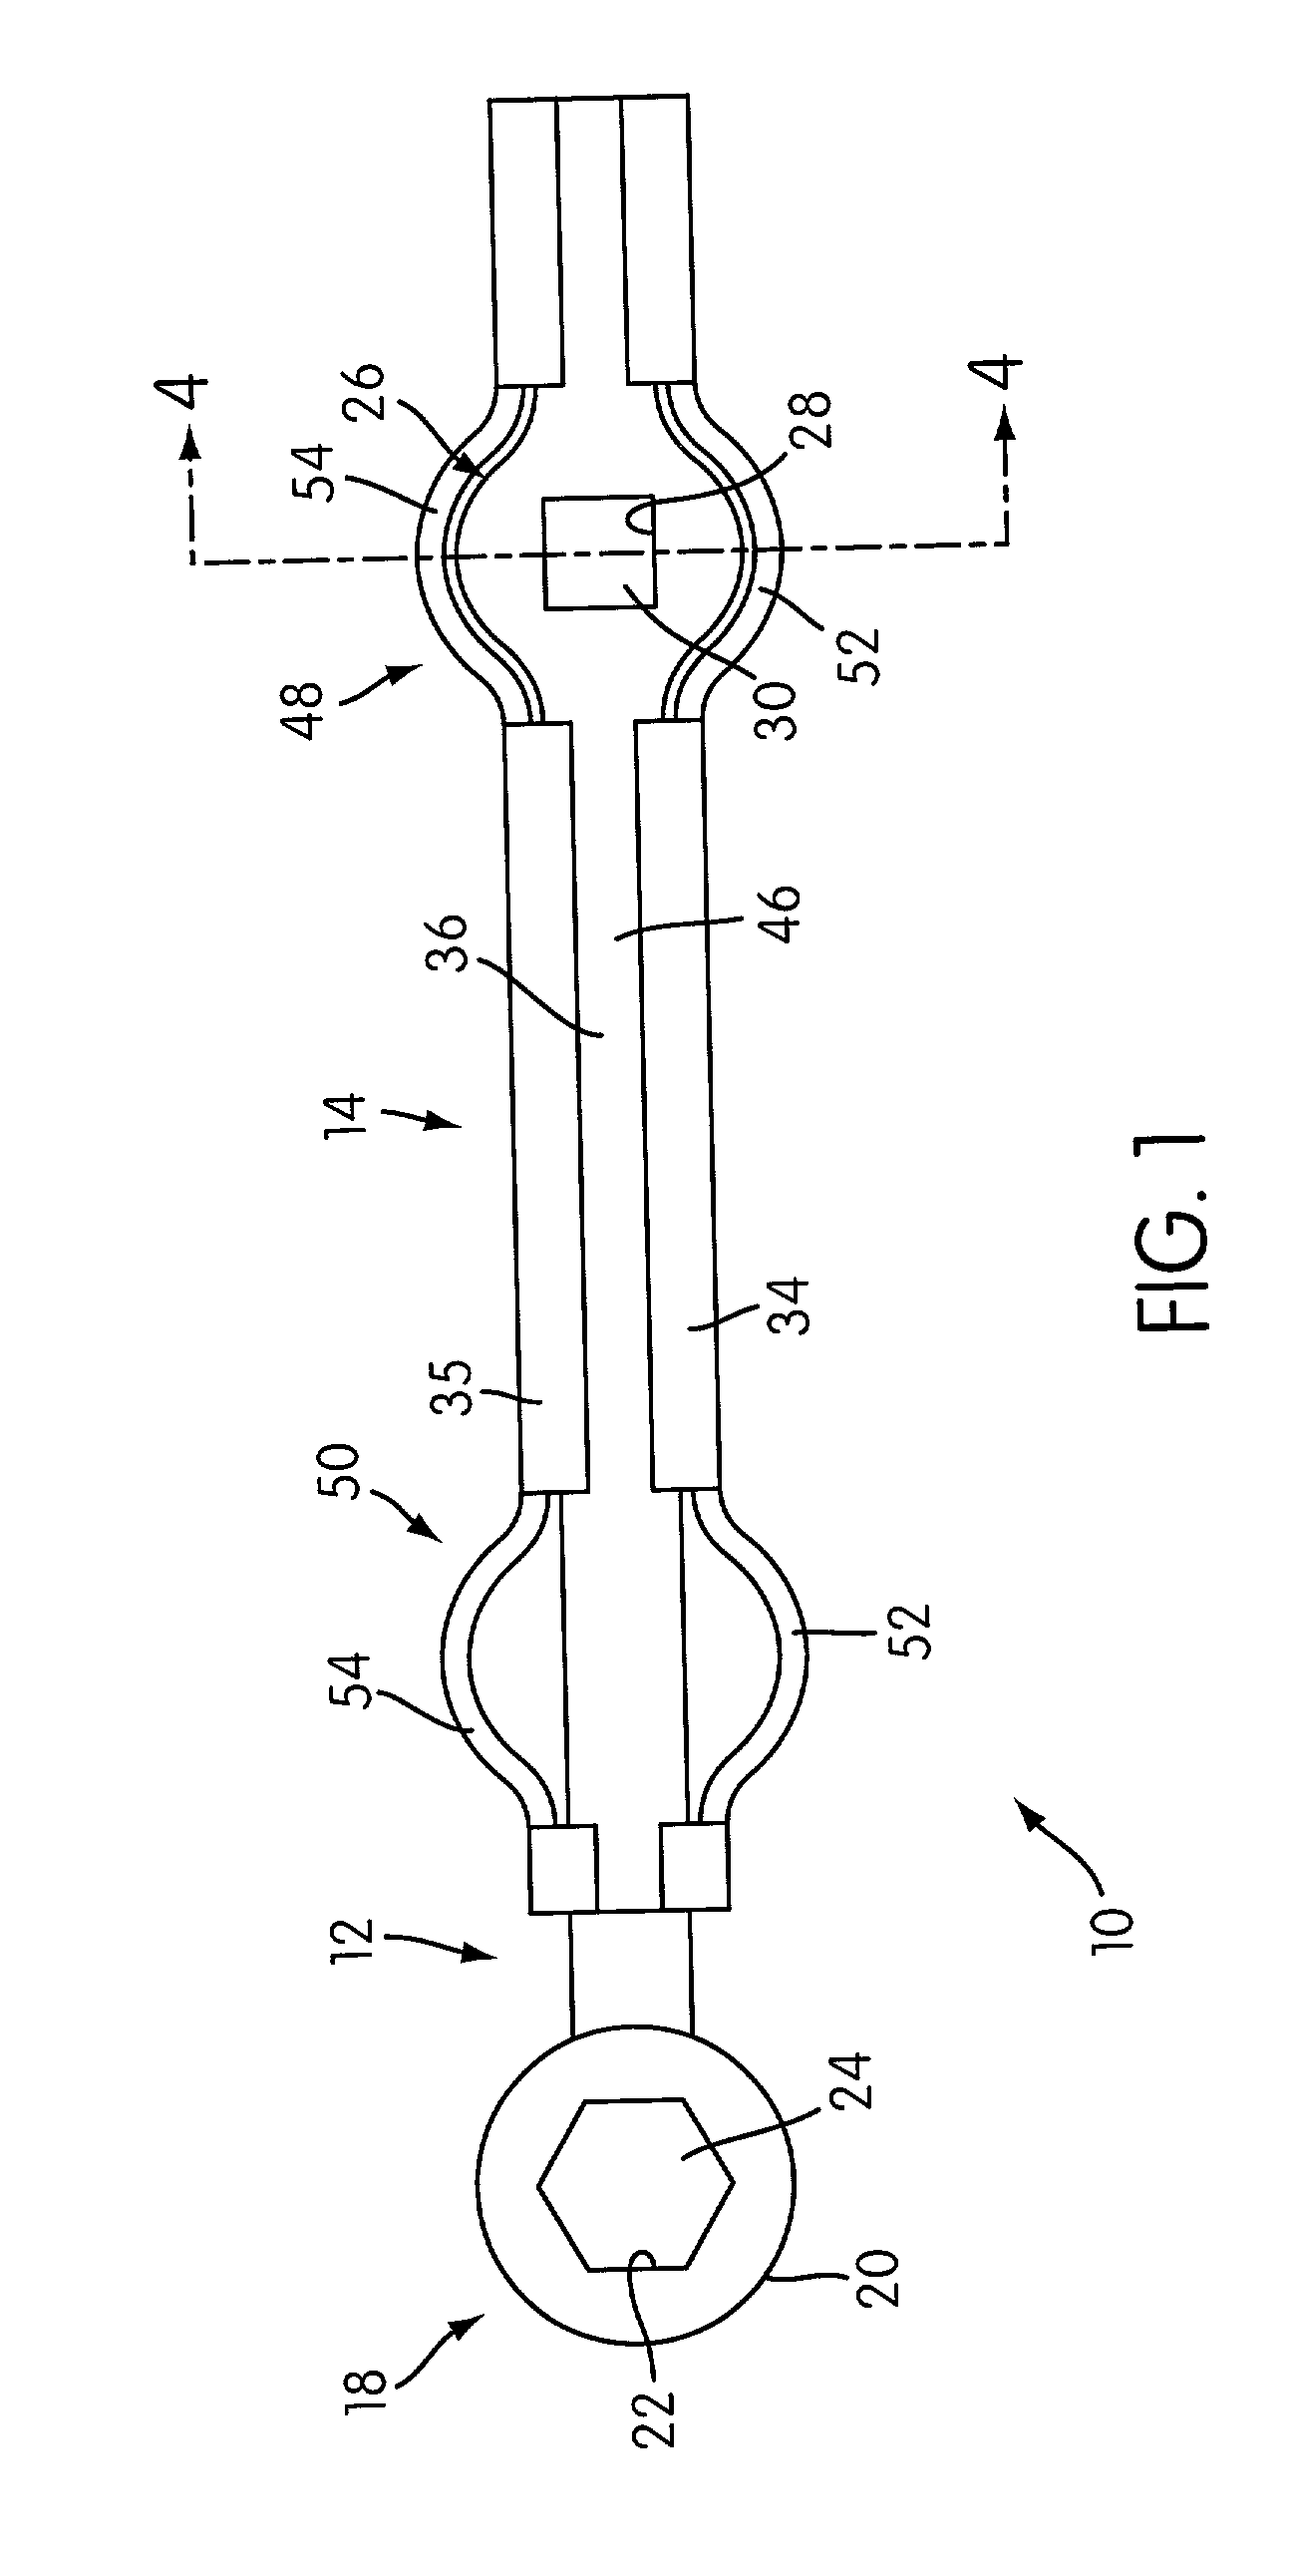 Extendible and rectractable tool for applying torque to wheel lug nuts